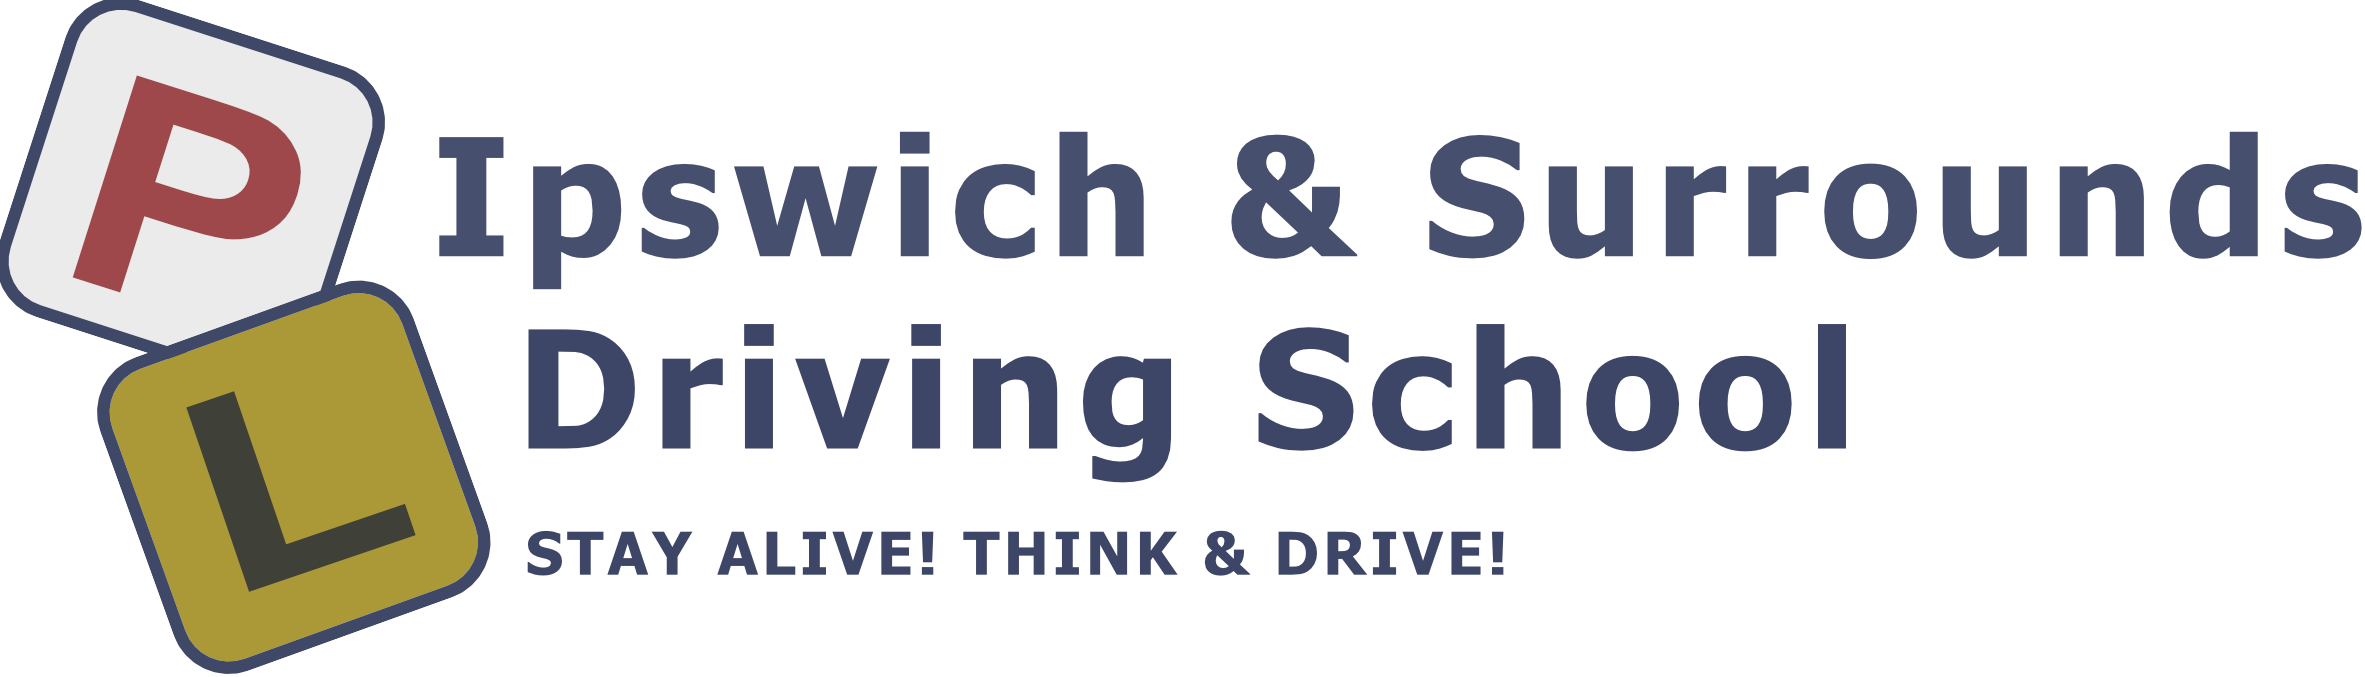 Ipswich and Surrounds Driving School